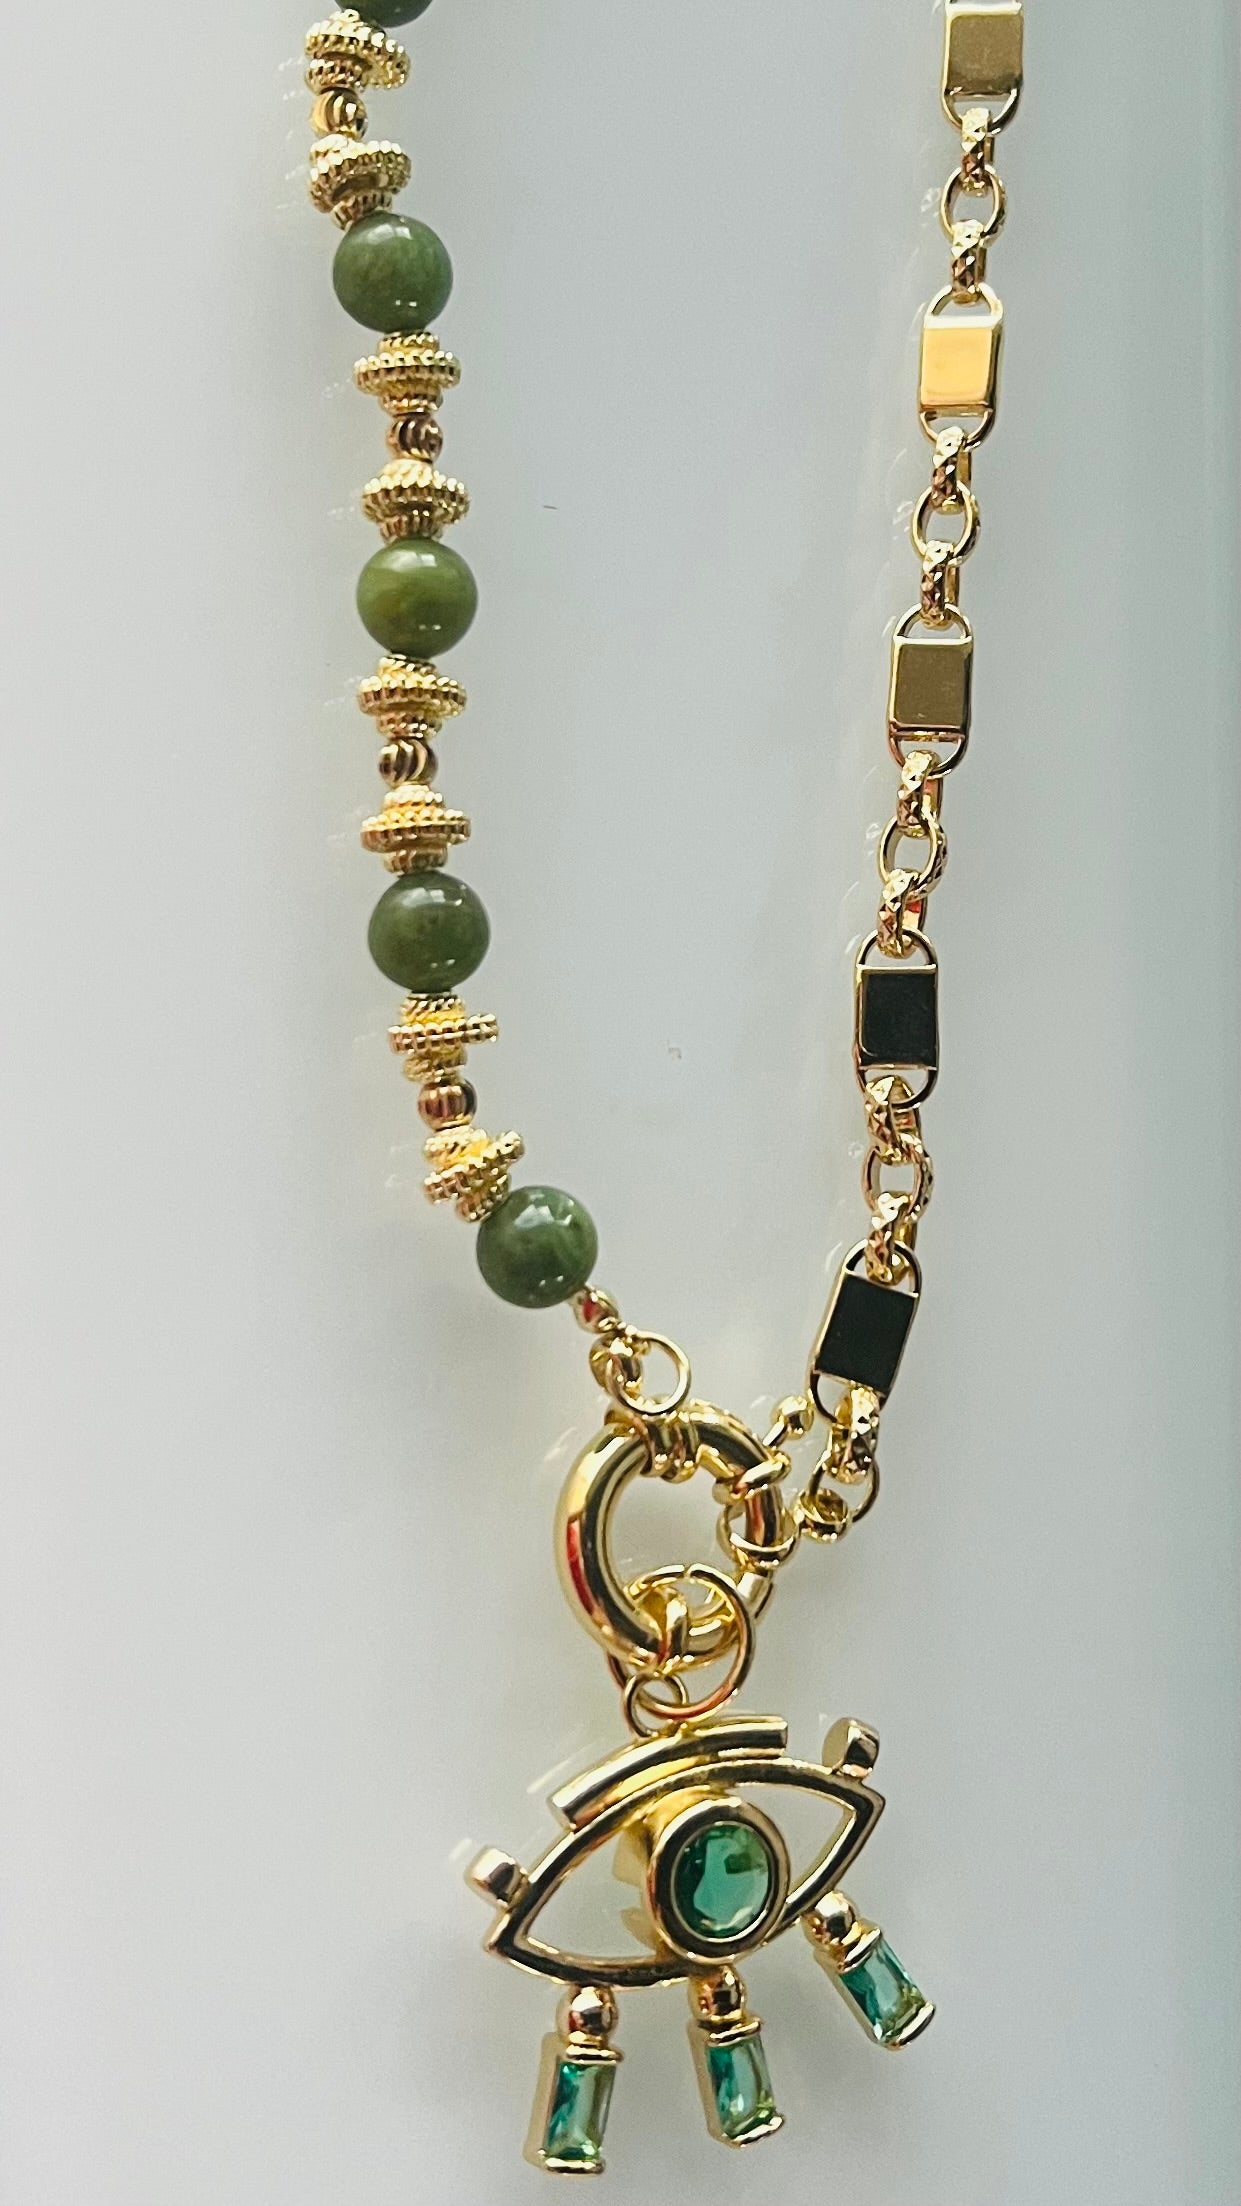 Necklace gold green beads third eye